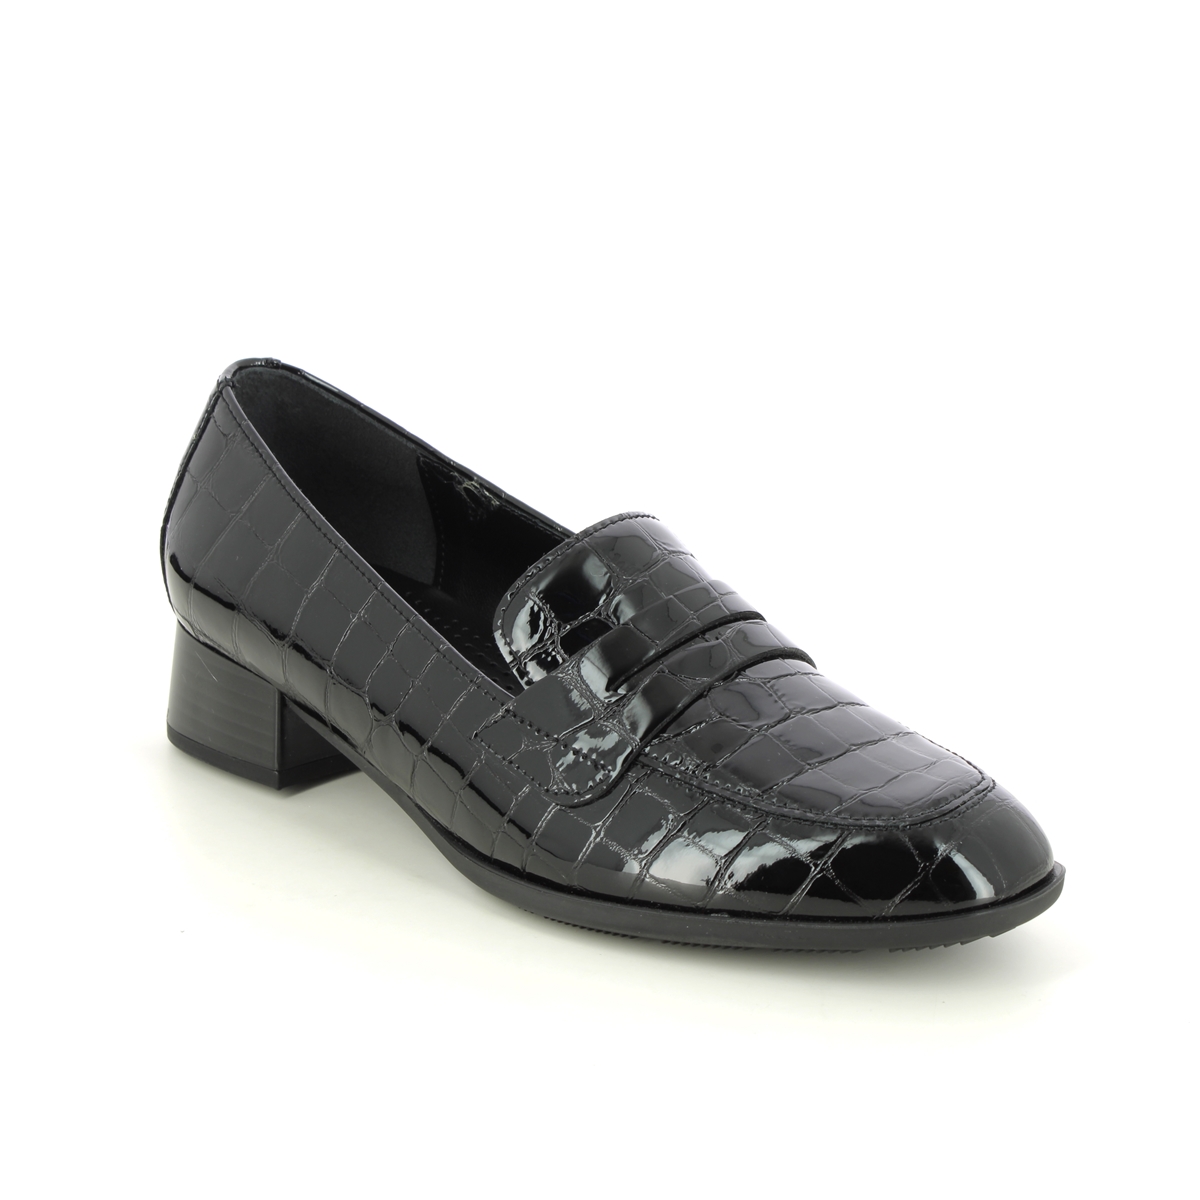 Gabor Right Penny Black Croc Womens Loafers 35.280.97 In Size 5.5 In Plain Black Croc Effect  Womens Loafers In Soft Black Croc Effect Leather